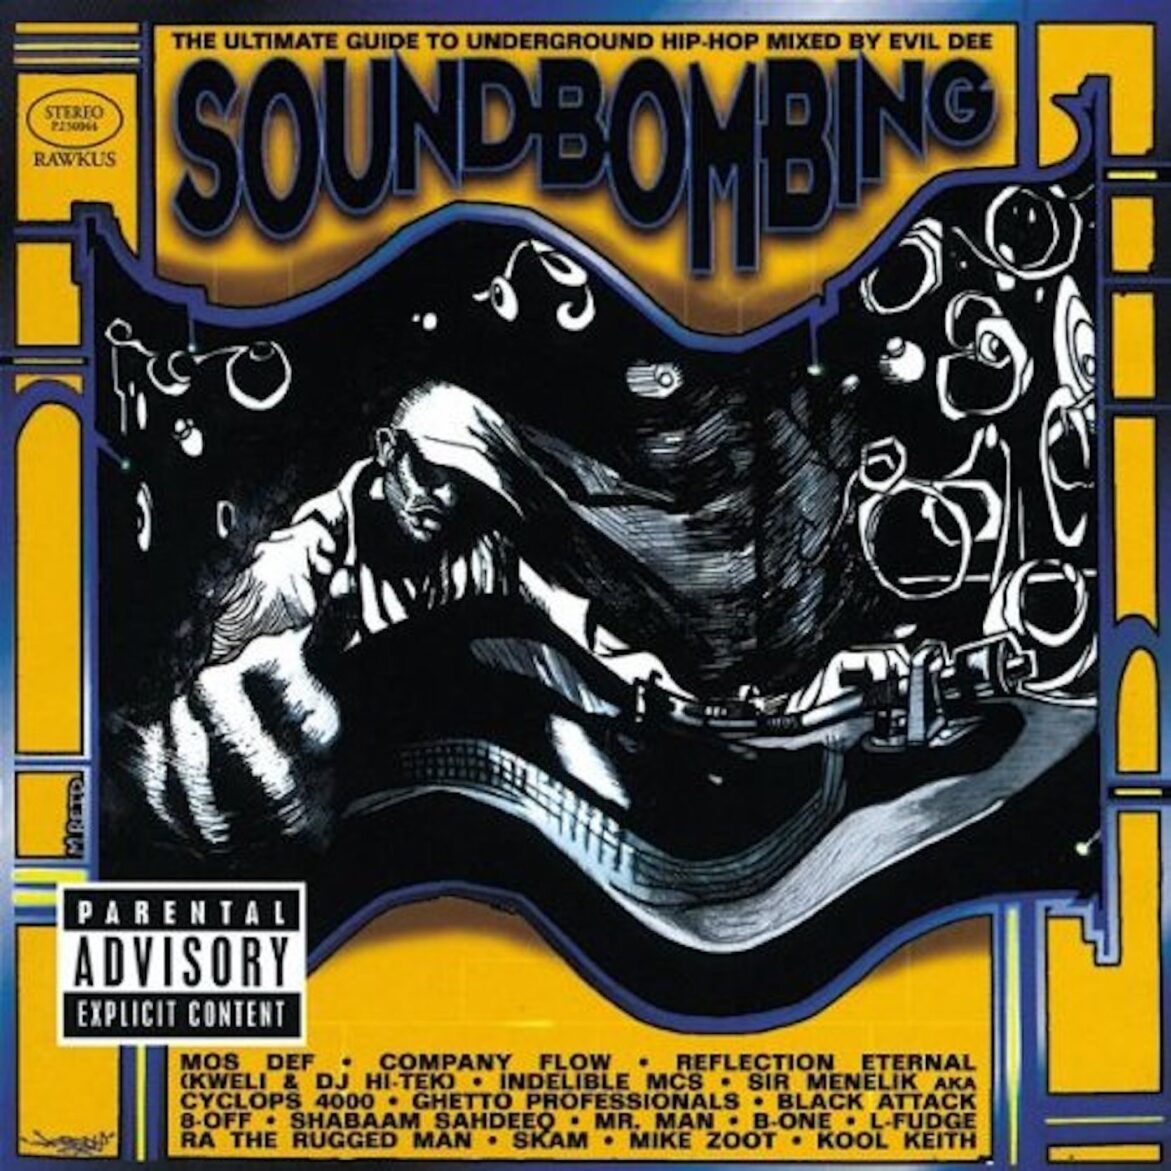 Black Podcasting - Rawkus Presents: Soundbombing (1997). The UnderGround Moves As One